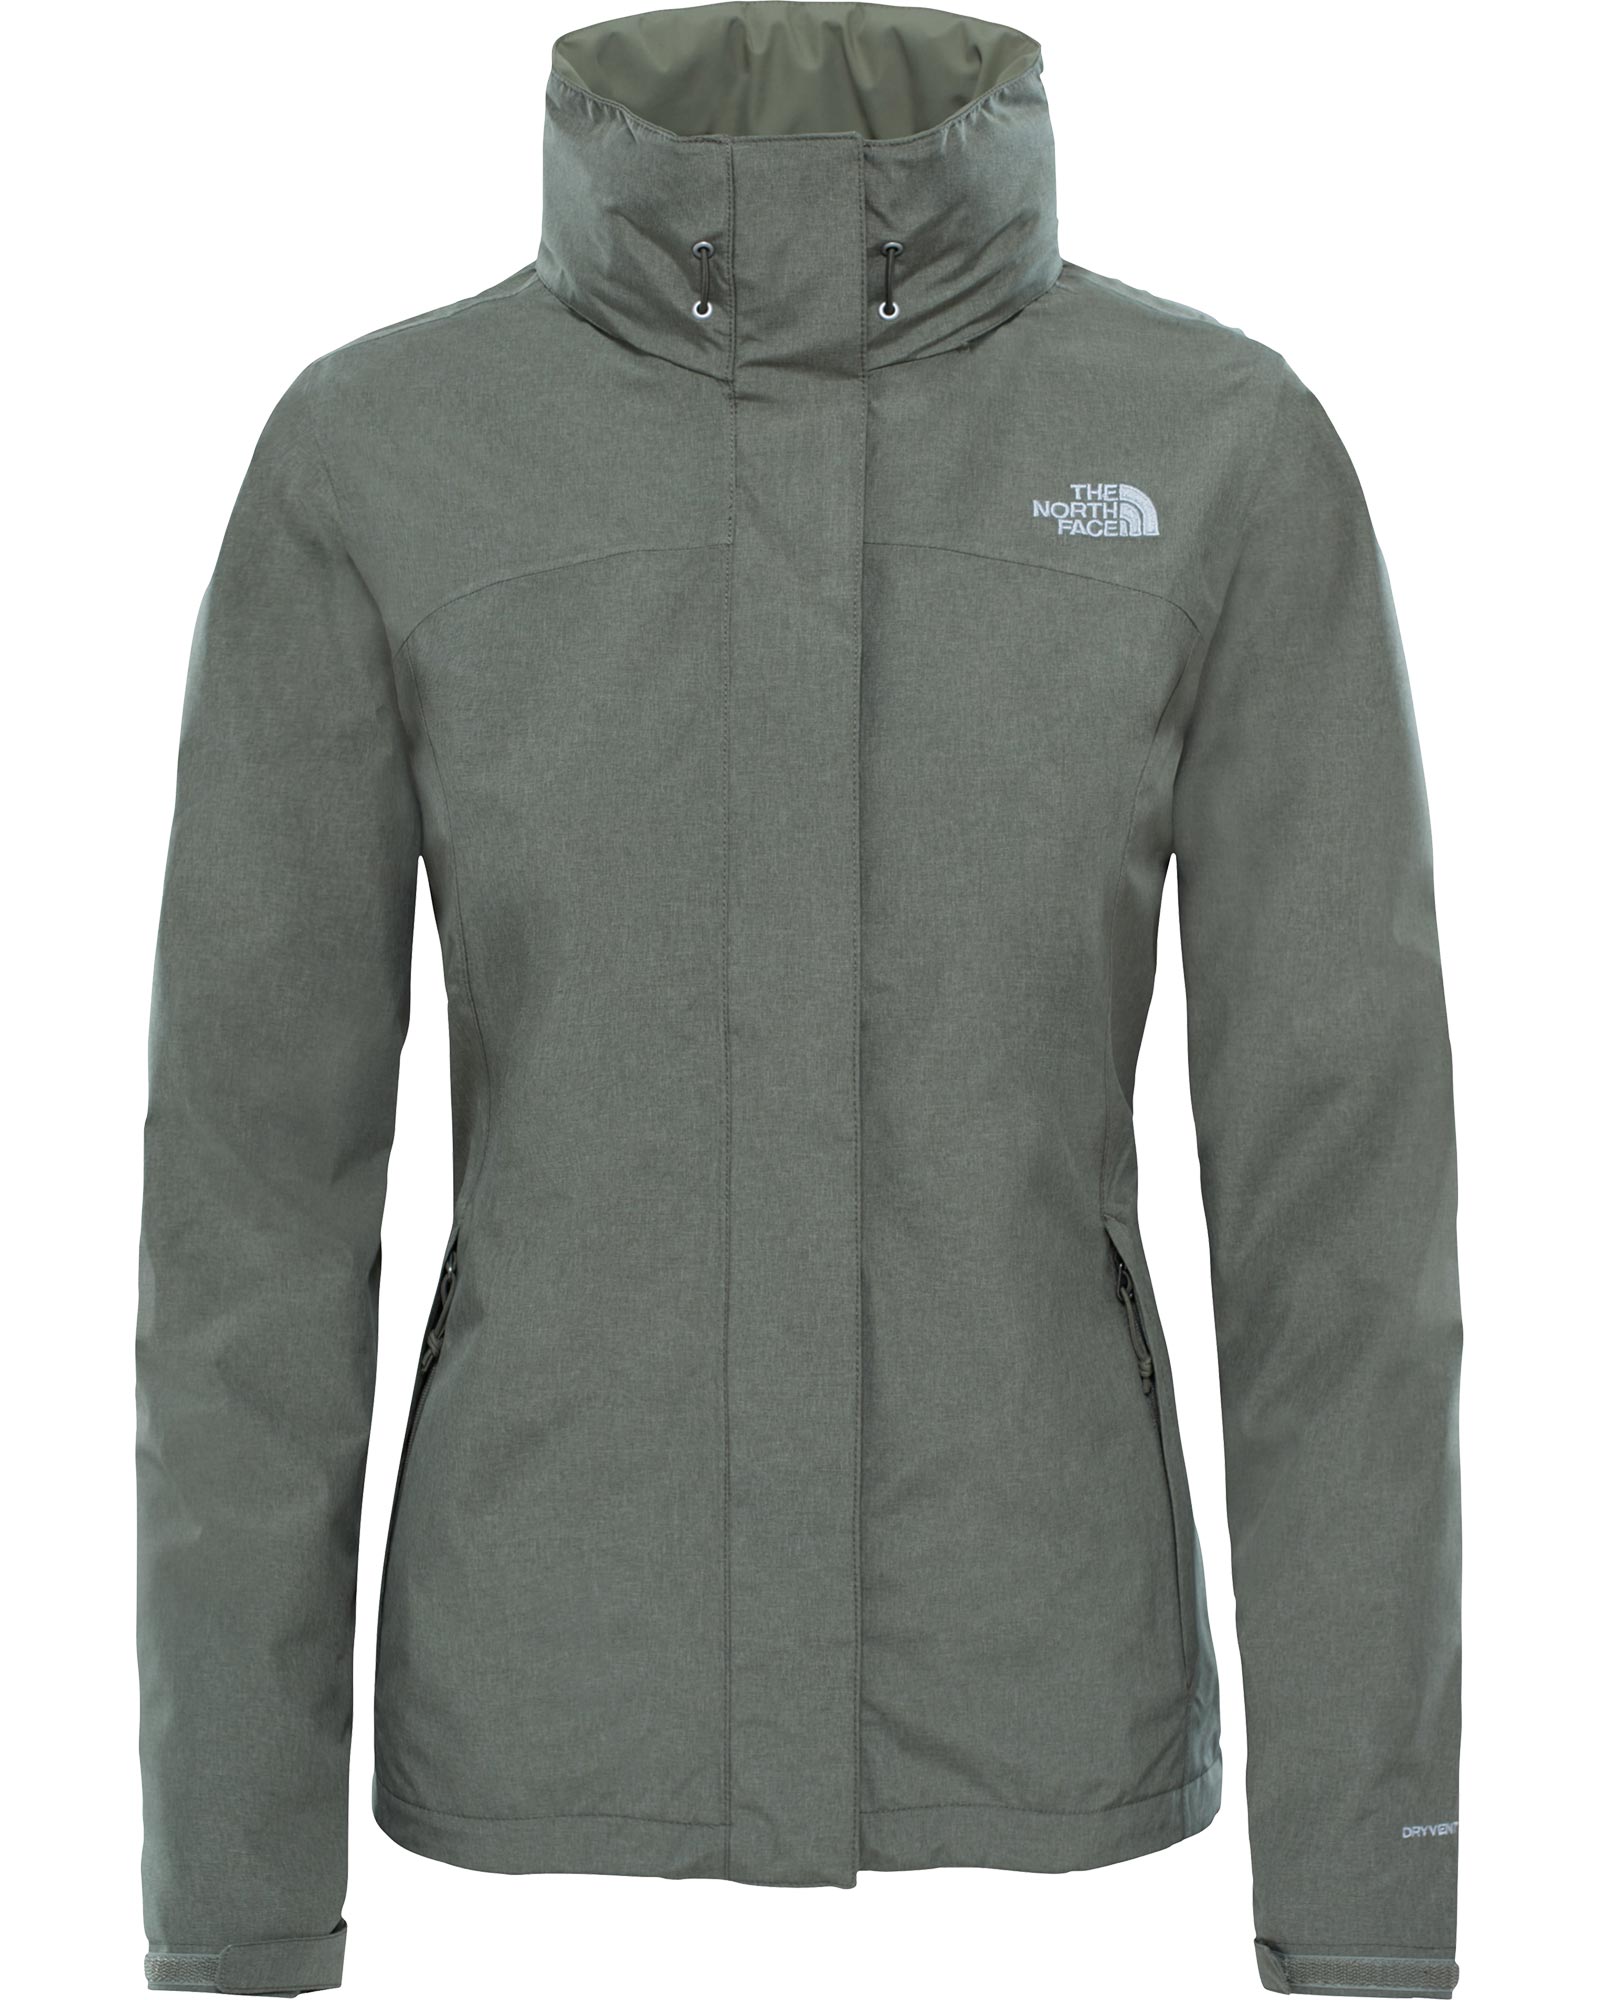 The North Face Sangro Dryvent Womens Jacket